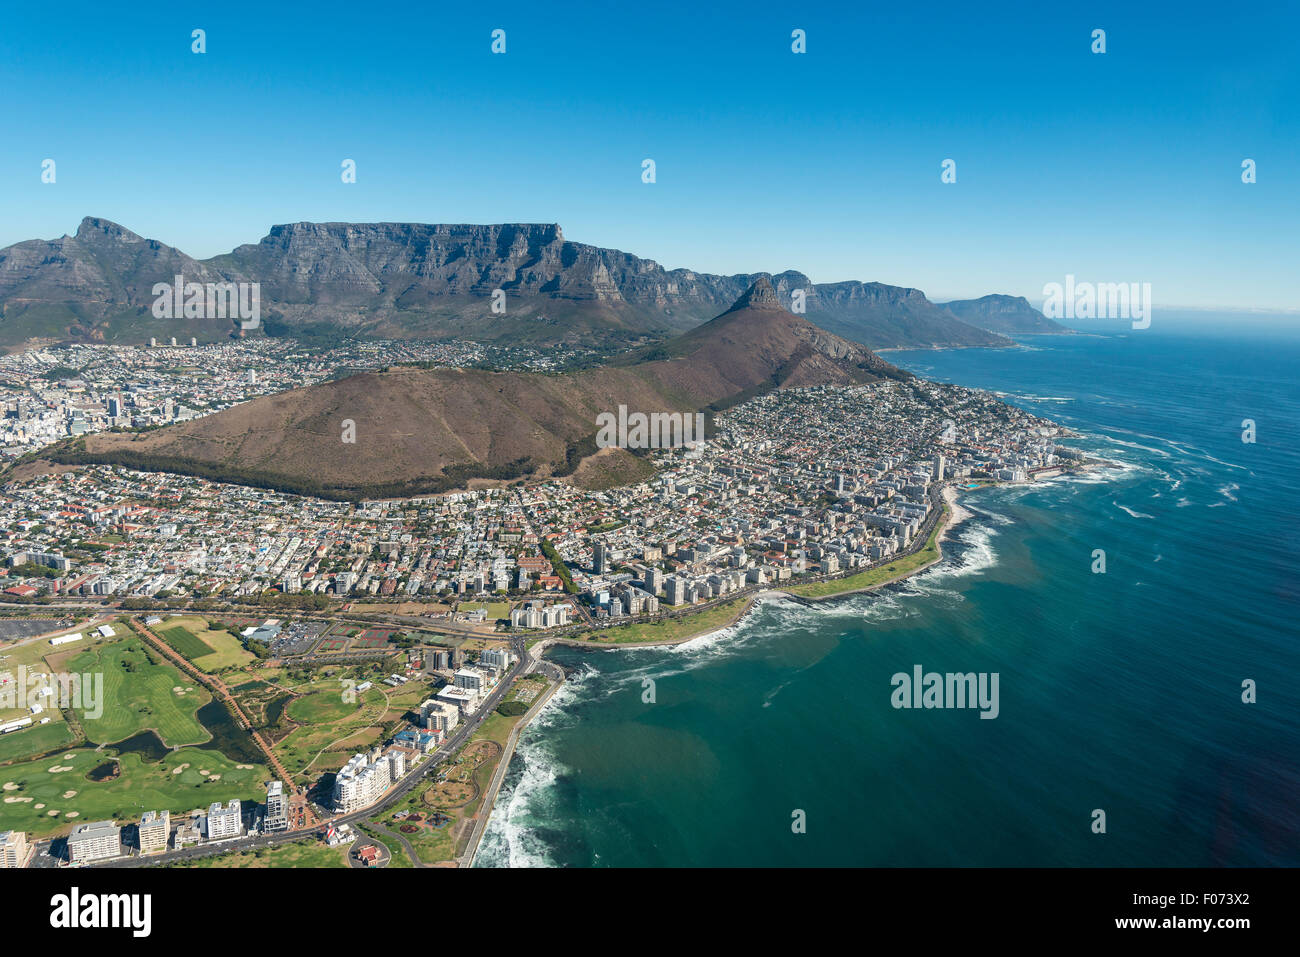 Aerial view of city and beaches, Cape Town, Western Cape Province, Republic of South Africa Stock Photo